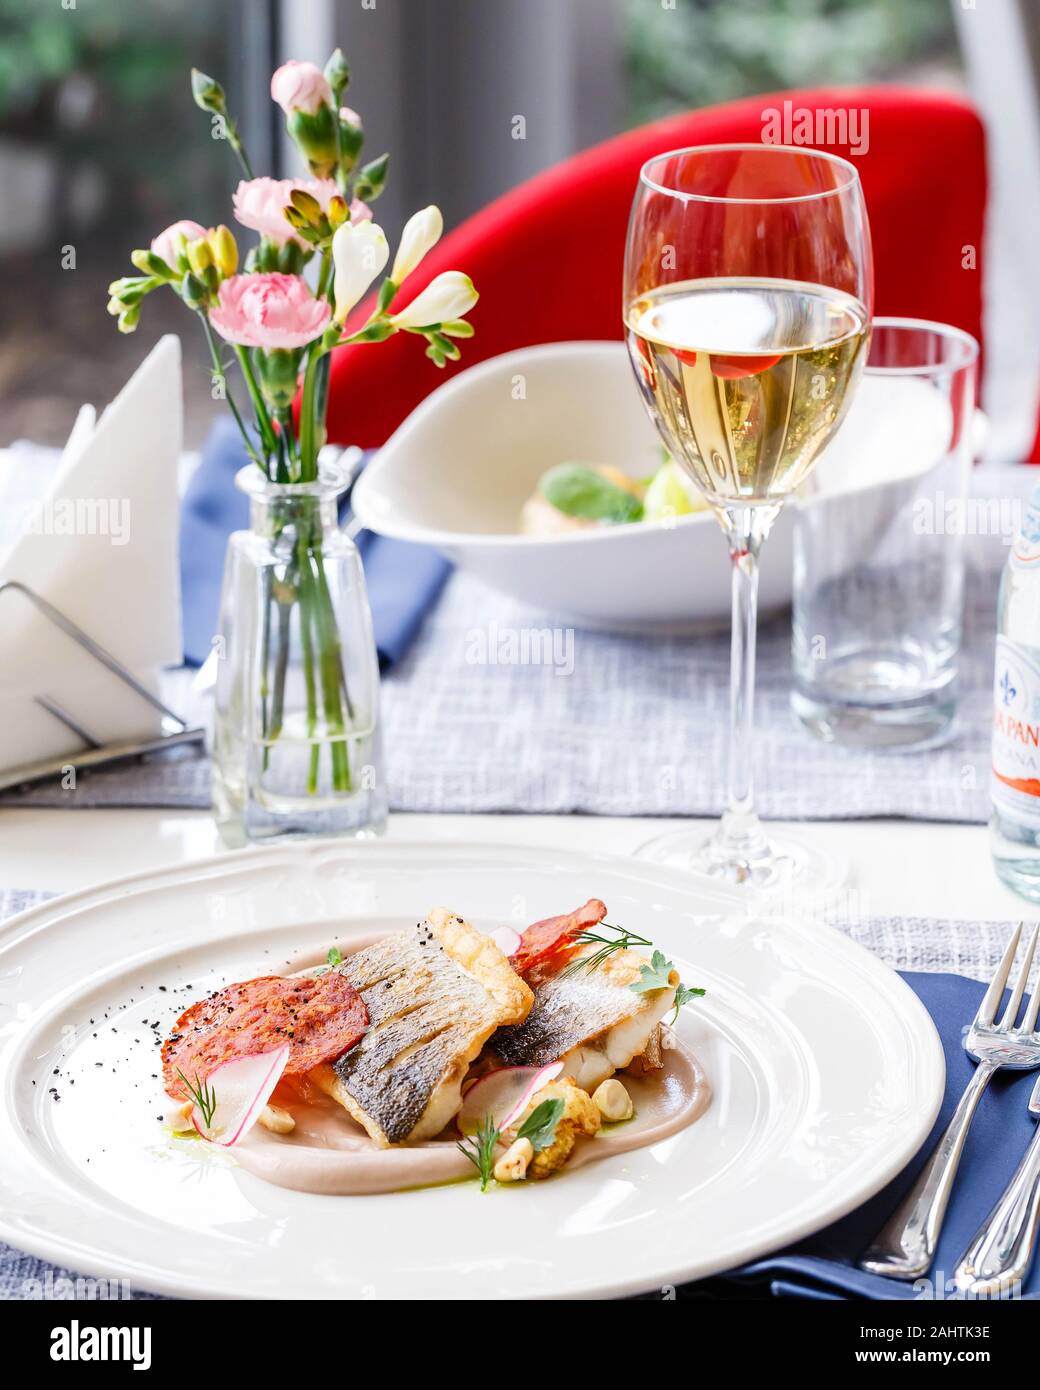 Pike perch fillet with chorizo, cauliflower and radish in a restaurant serving Stock Photo